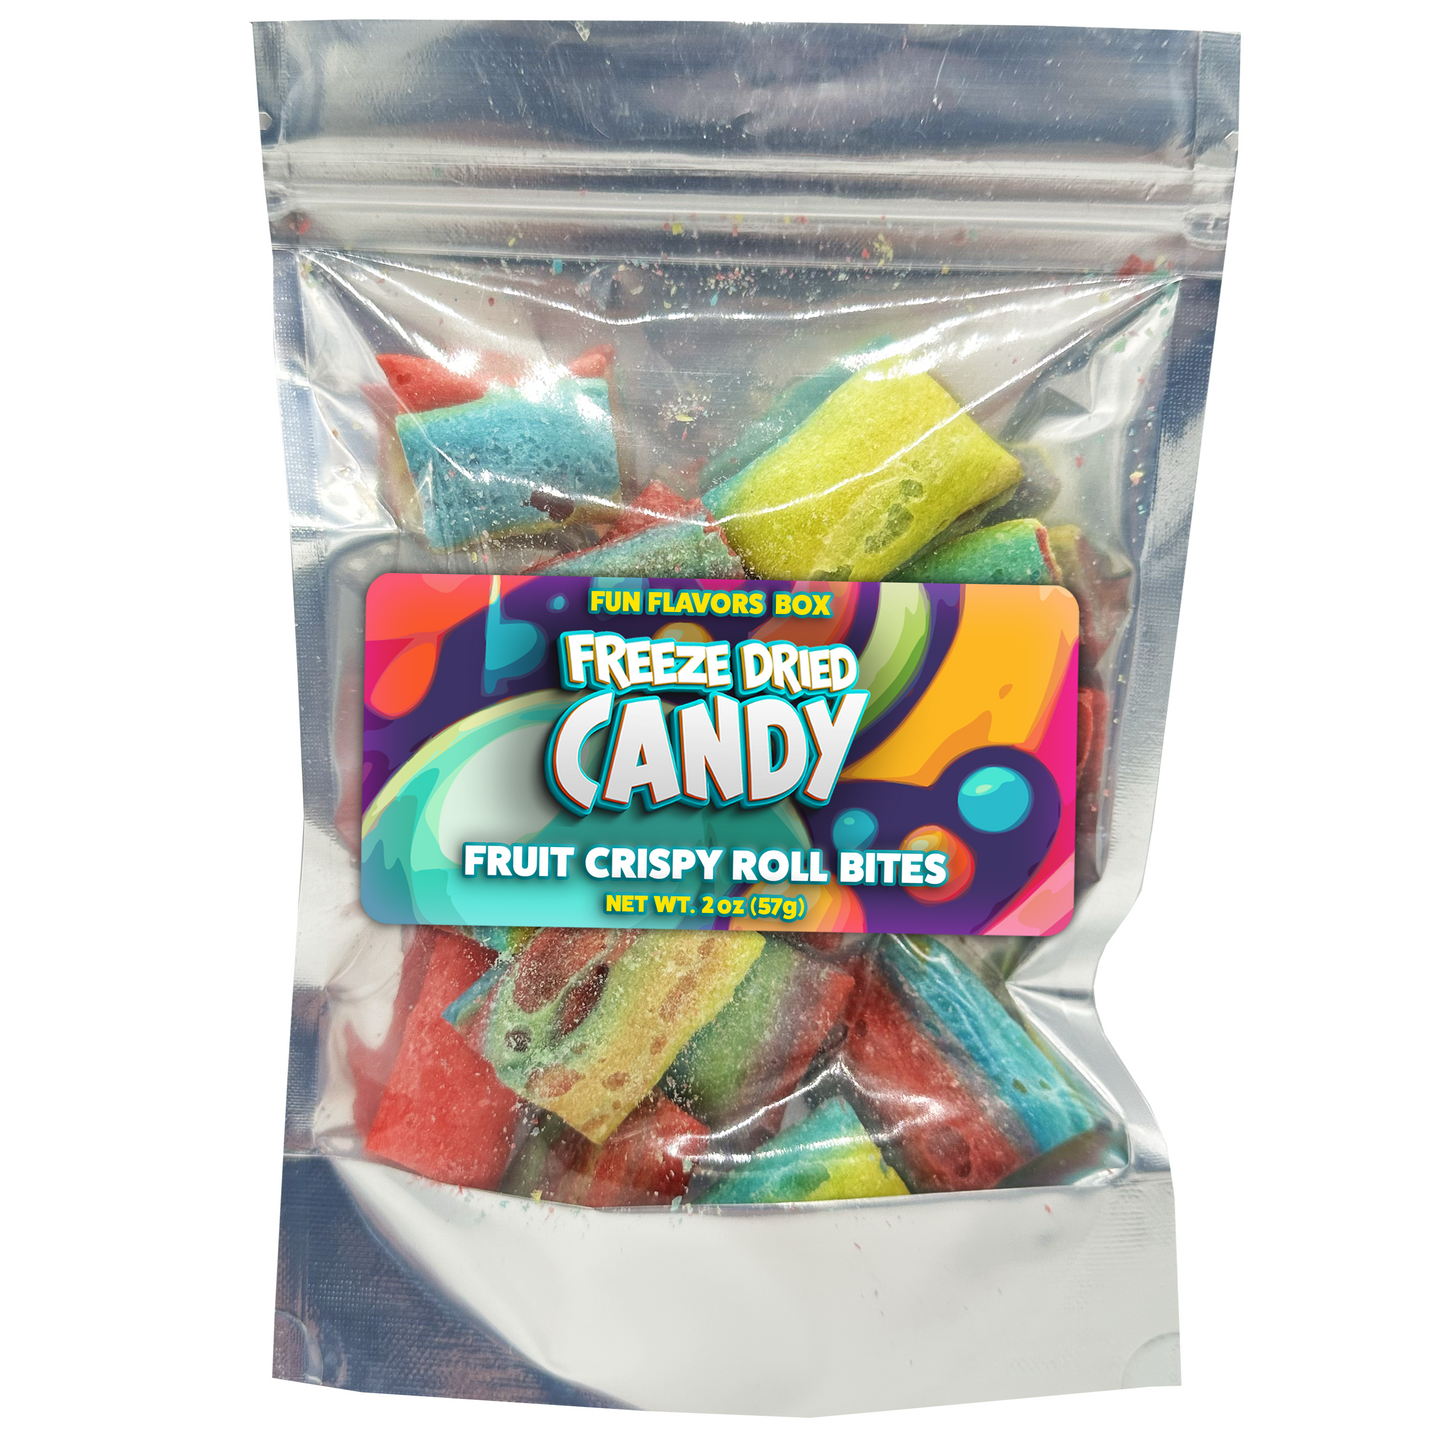 Freeze Dried Candy Fruit Crispy Roll Bites Variety Pack Crunch Candy Snack 2 oz